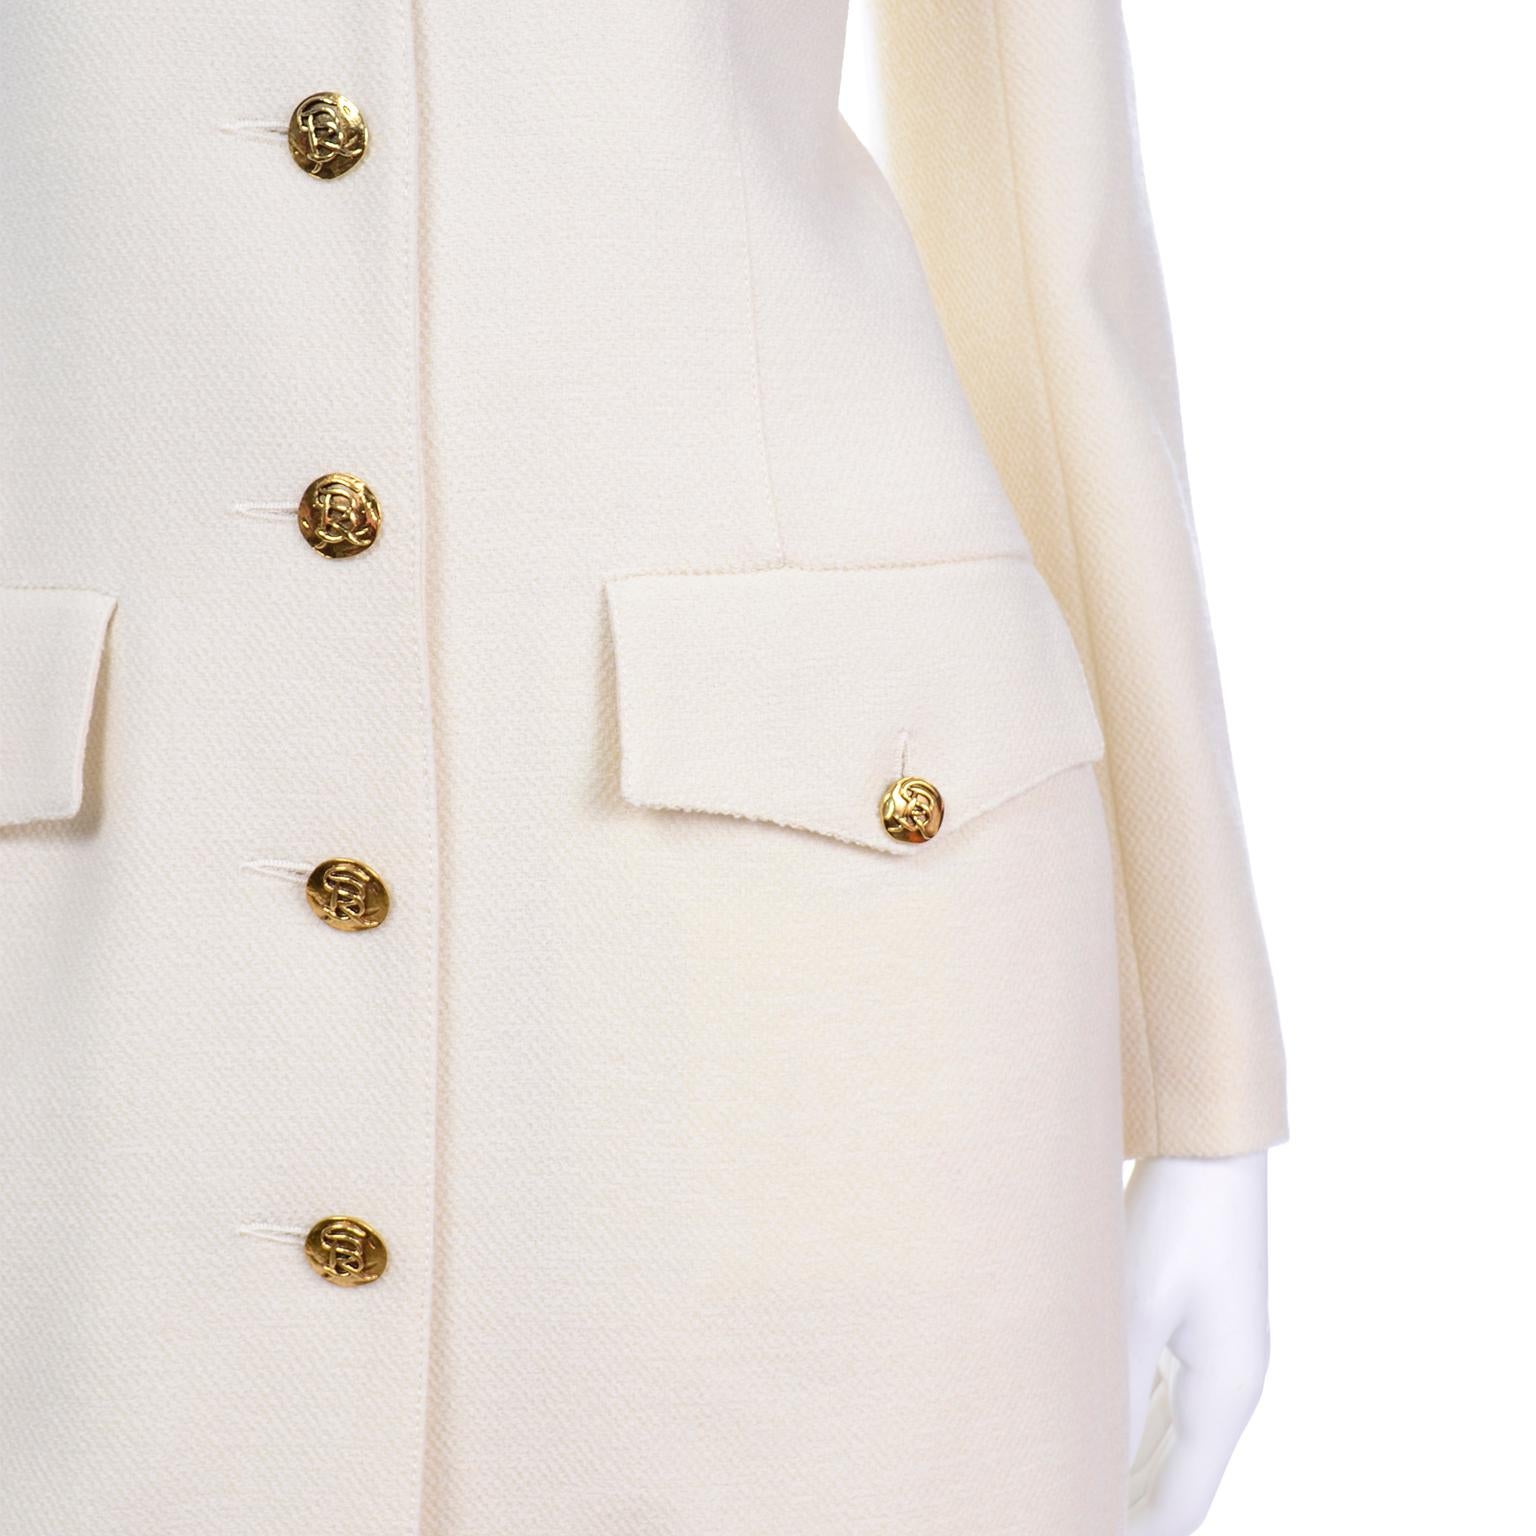 Sonia Rykiel Cream Trouser Suit W Longline Jacket & High Waisted Pants In Excellent Condition For Sale In Portland, OR